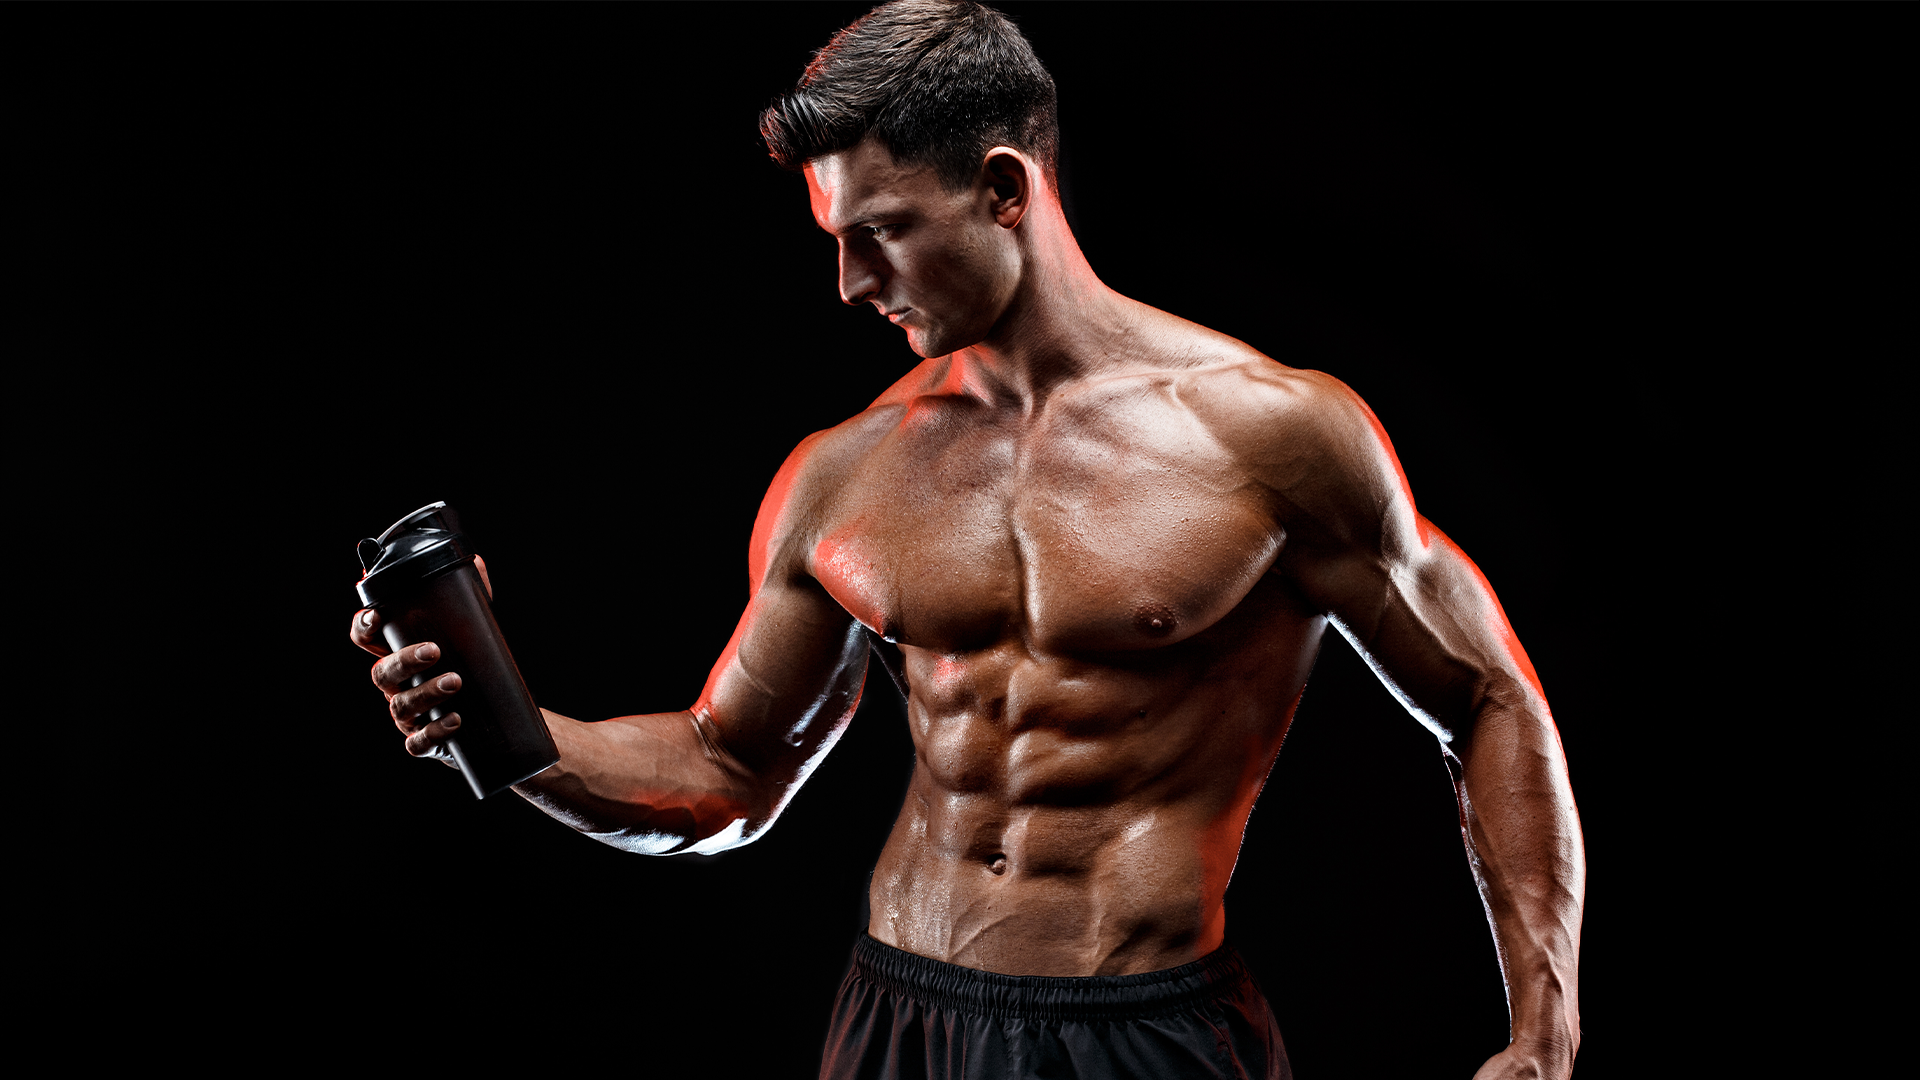 How to plan your muscle building diet